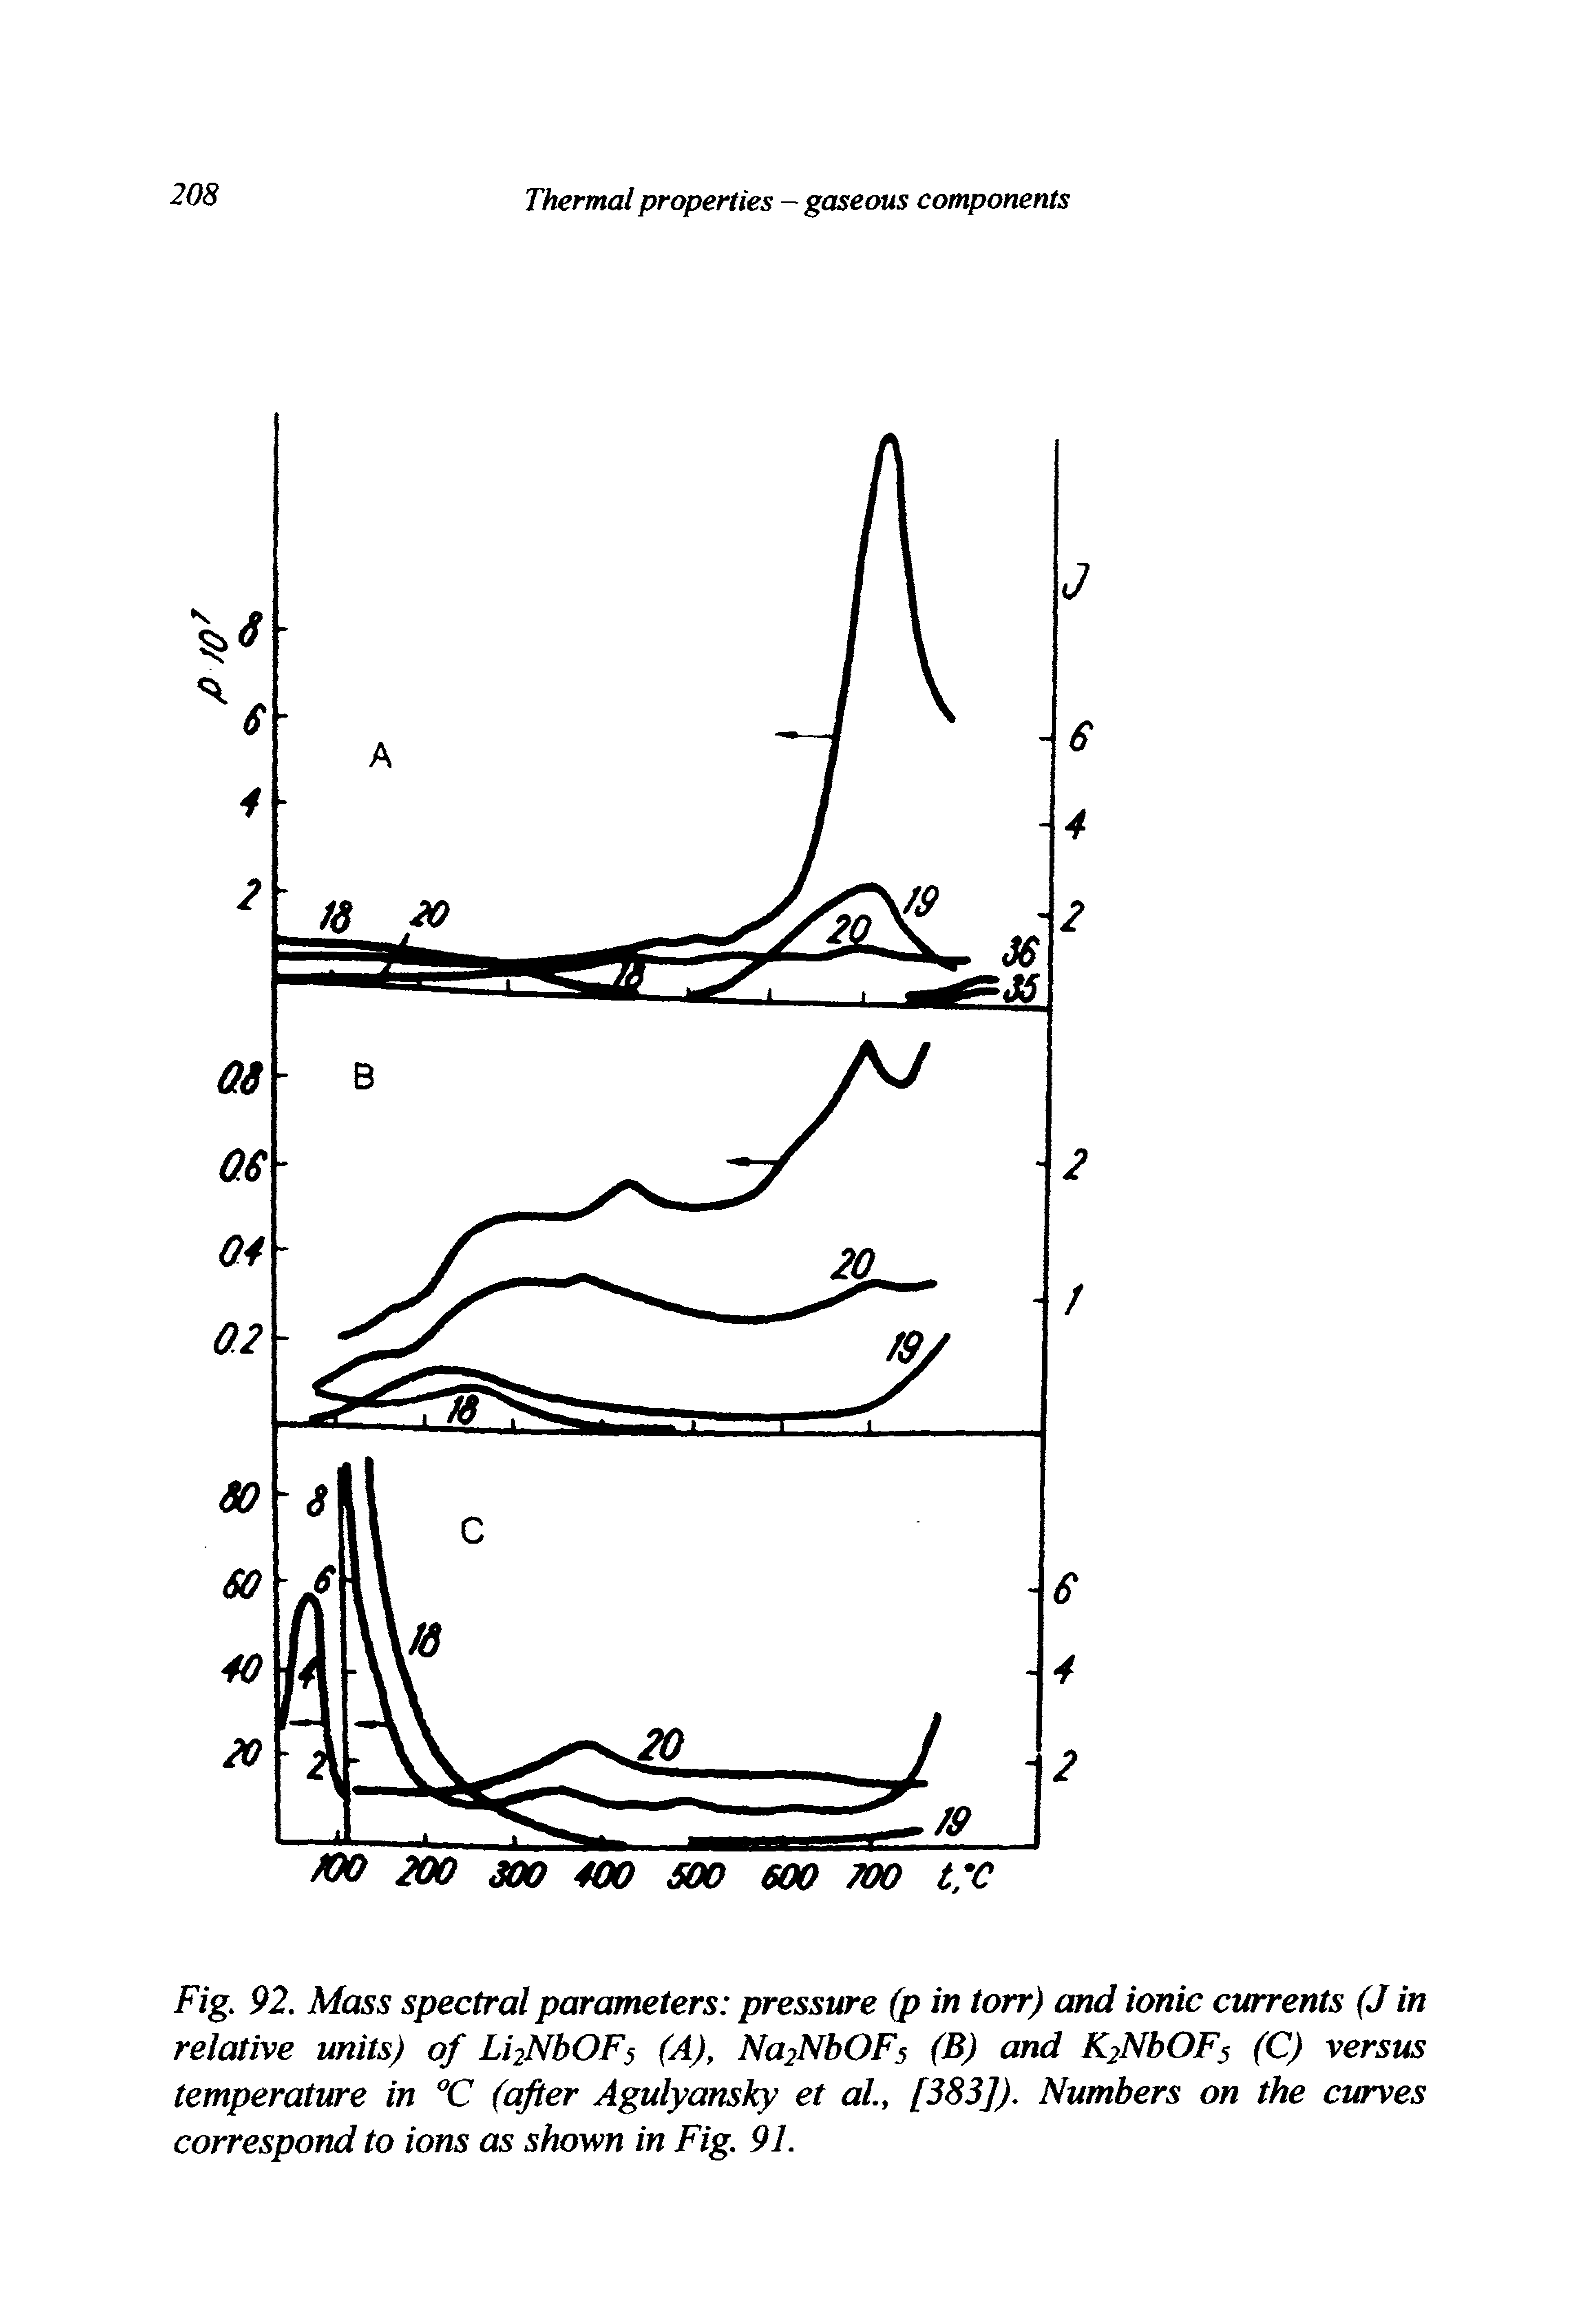 Fig. 92. Mass spectral parameters pressure (p in torr) and ionic currents (J in relative units) of Li2NbOF5 (A), Na2NbOFs (B) and K2NbOFs (C) versus temperature in °C (after Agulyansky et ah, [383]). Numbers on the curves correspond to ions as shown in Fig. 91.